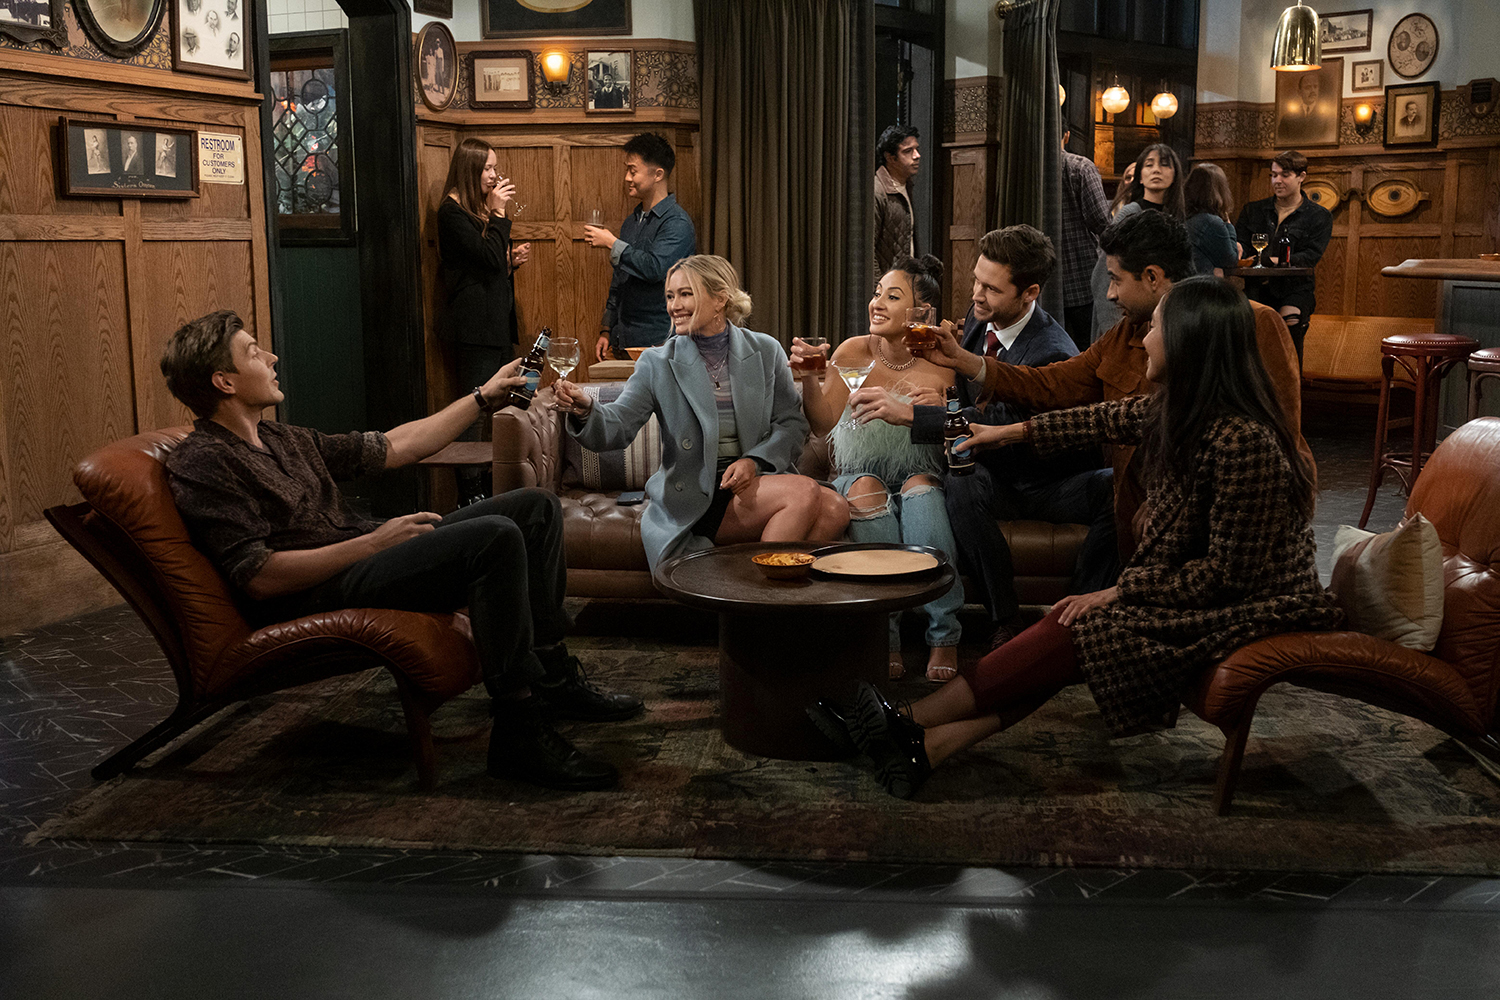 Chris Lowell as Jesse, Hilary Duff as Sophie, Francia Raisa as Valentina, Tom Ainsley as Charlie, Suraj Sharma as Sid, and Tien Tran as Ellen in How I Met Your Father